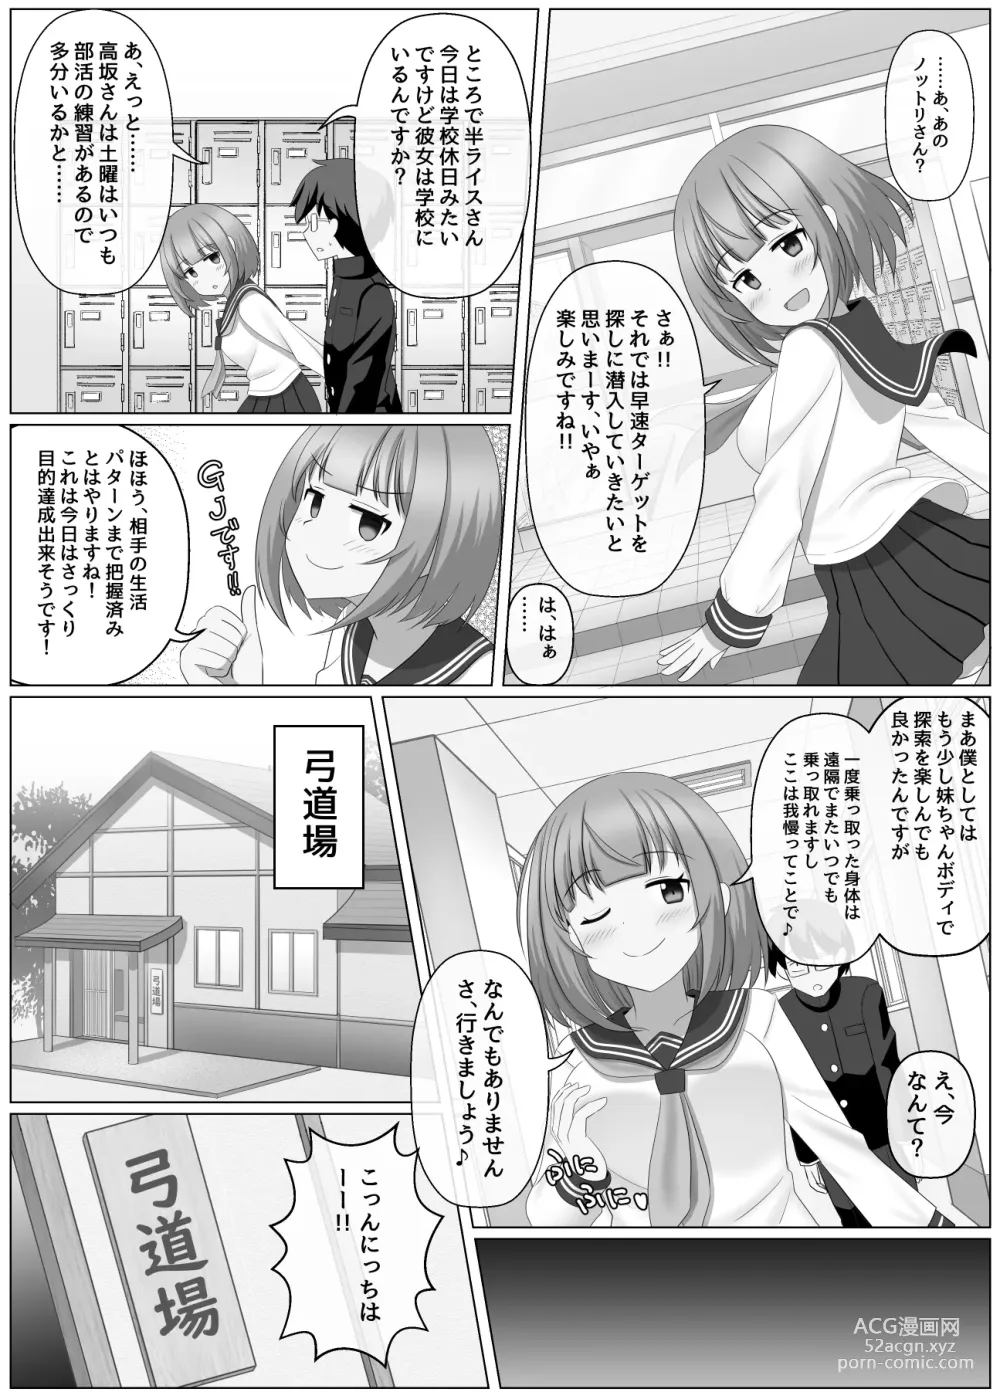 Page 10 of doujinshi Nottori Channel